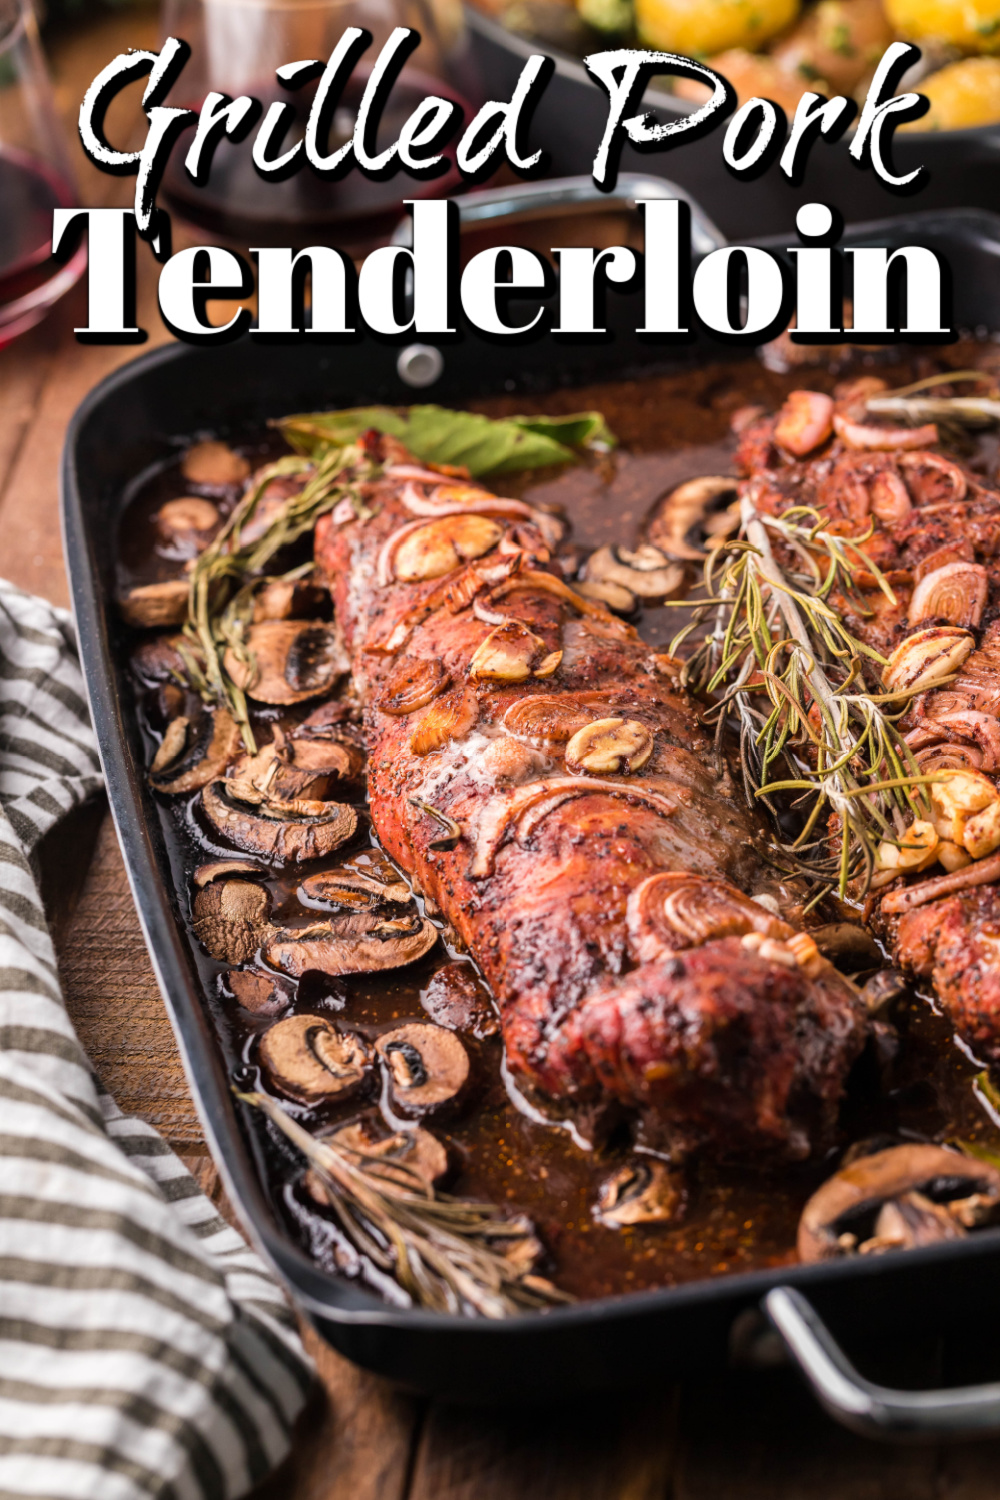 This amazing recipe doesn't take long to prepare. The ingredients to create the marinade and the rub are easy to make, creating a fantastic pork tenderloin!